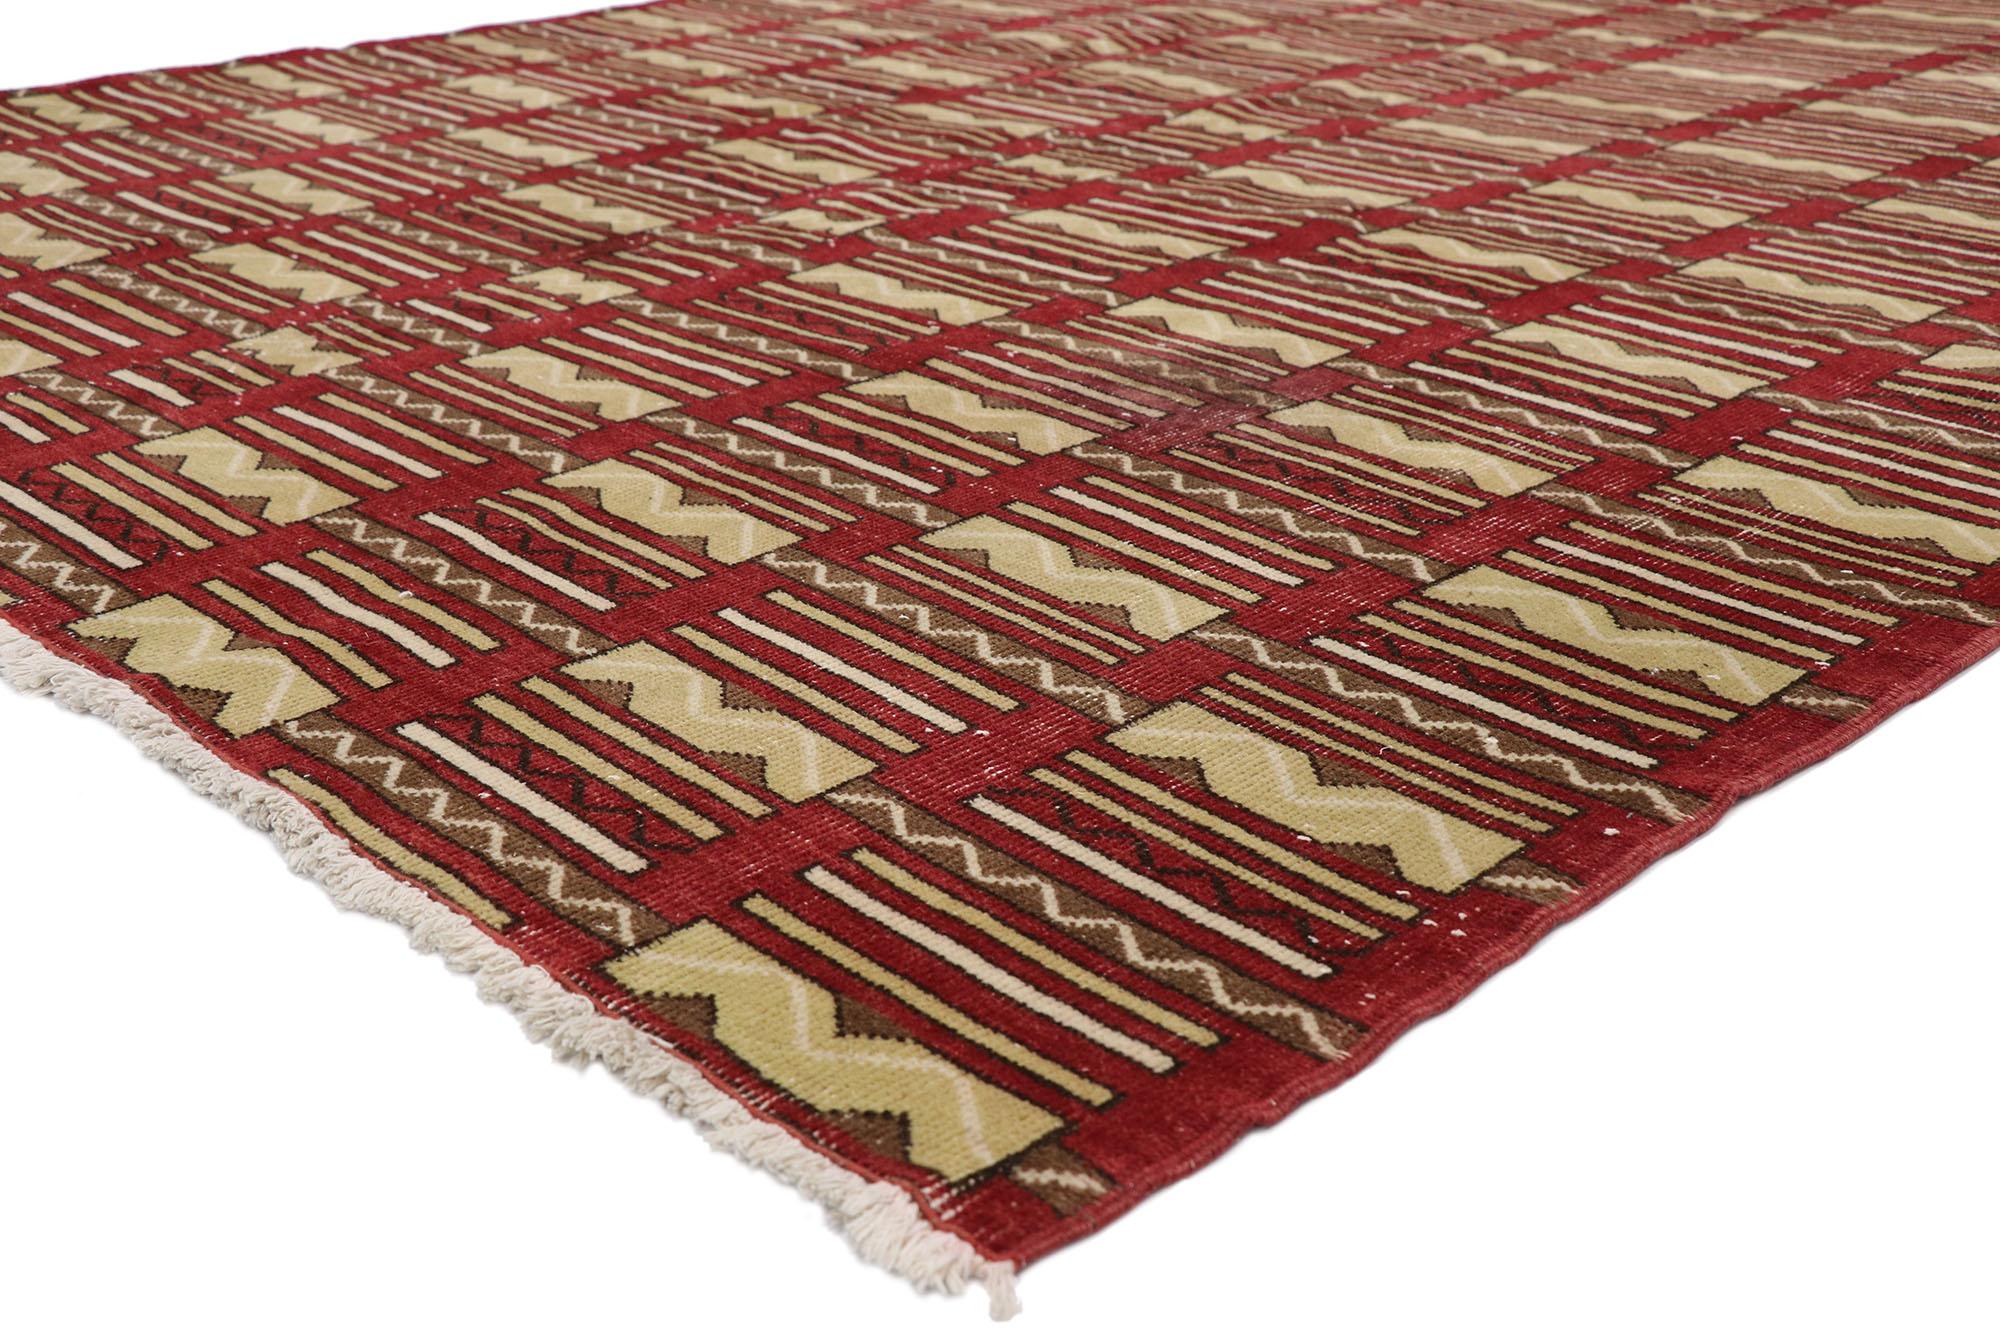 52602, Zeki Muren distressed vintage Turkish Sivas rug with Modern Art Deco style. Displaying balanced symmetry and bold geometric shapes combined with a lovingly time-worn composition, this hand knotted wool Zeki Muren distressed vintage Turkish